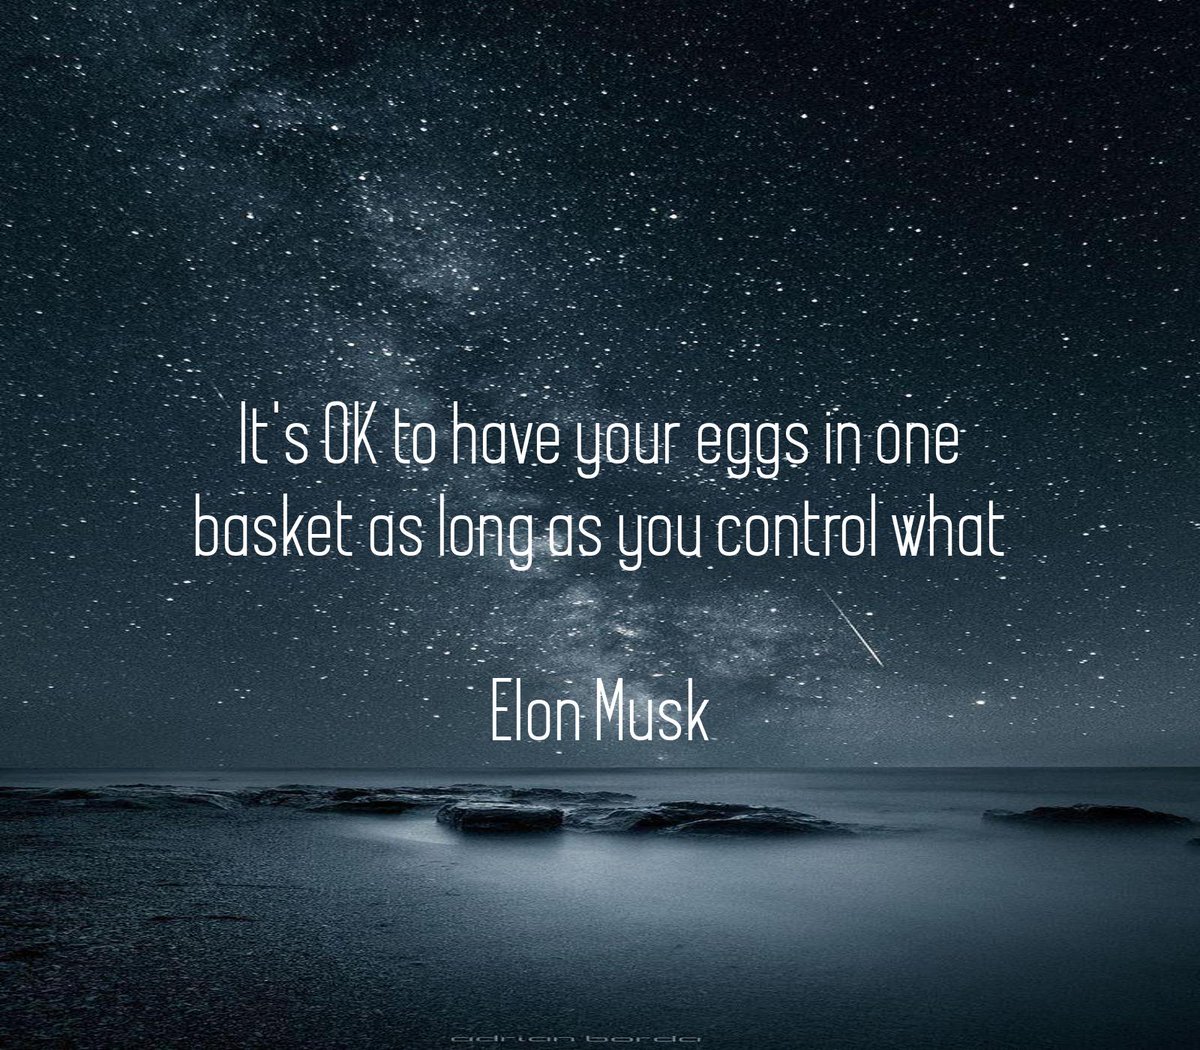 It's OK to have your eggs in one basket as long as you control what happens to that basket.